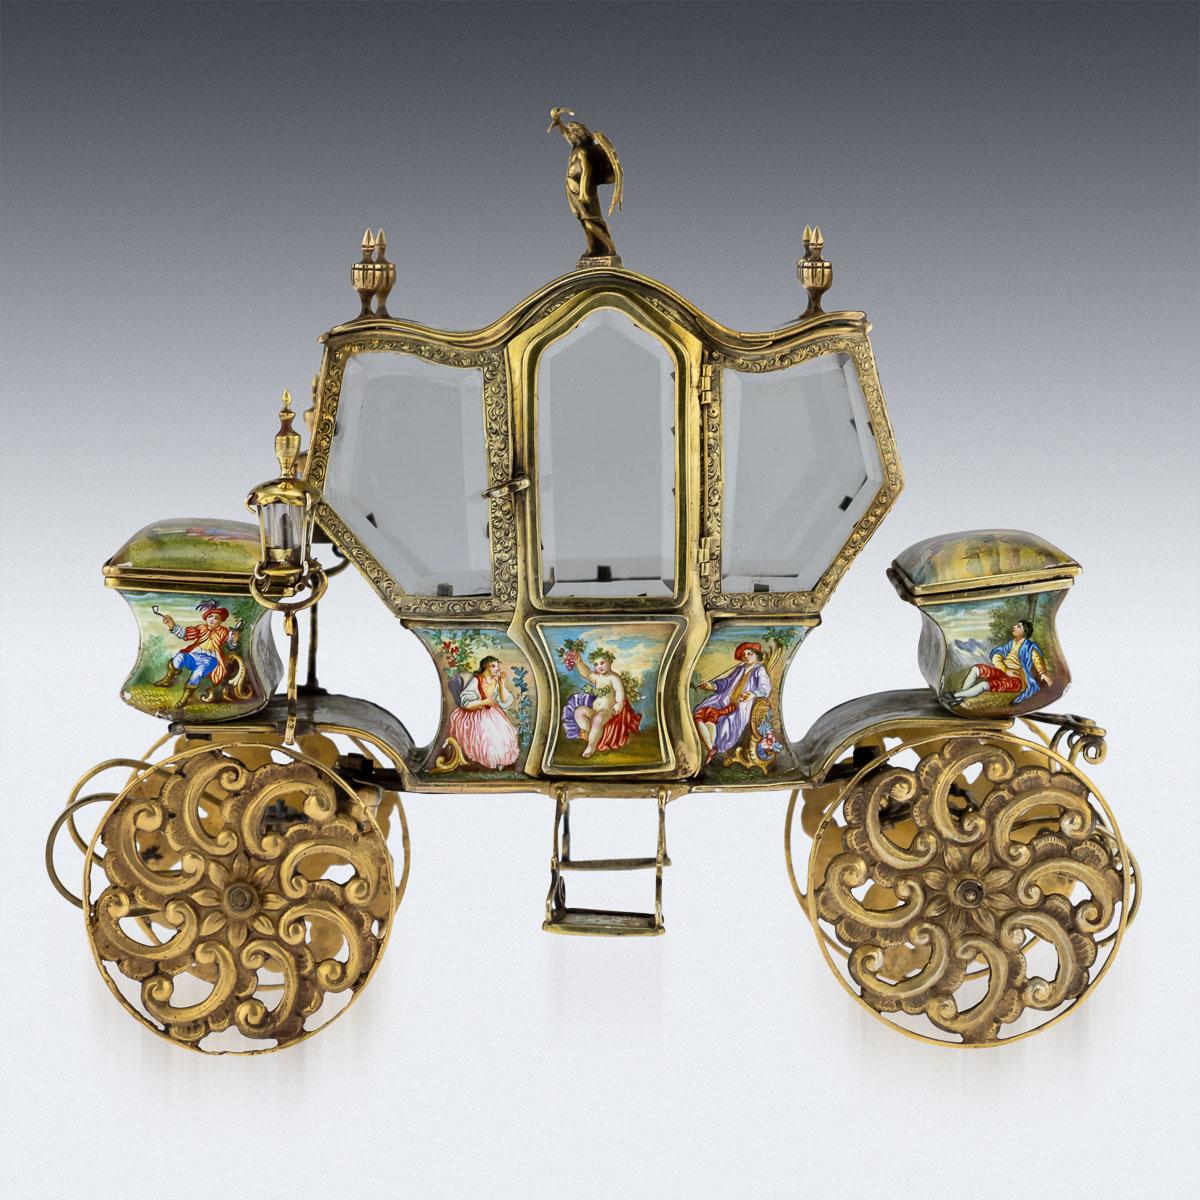 Antique late 19th century Austrian solid silver and hand painted enamel jewelry box shaped as a carriage, with highly decorative silver-gilt framed windows and doors, applied with feather-spoked wheels and beautifully hand enameled with romantic